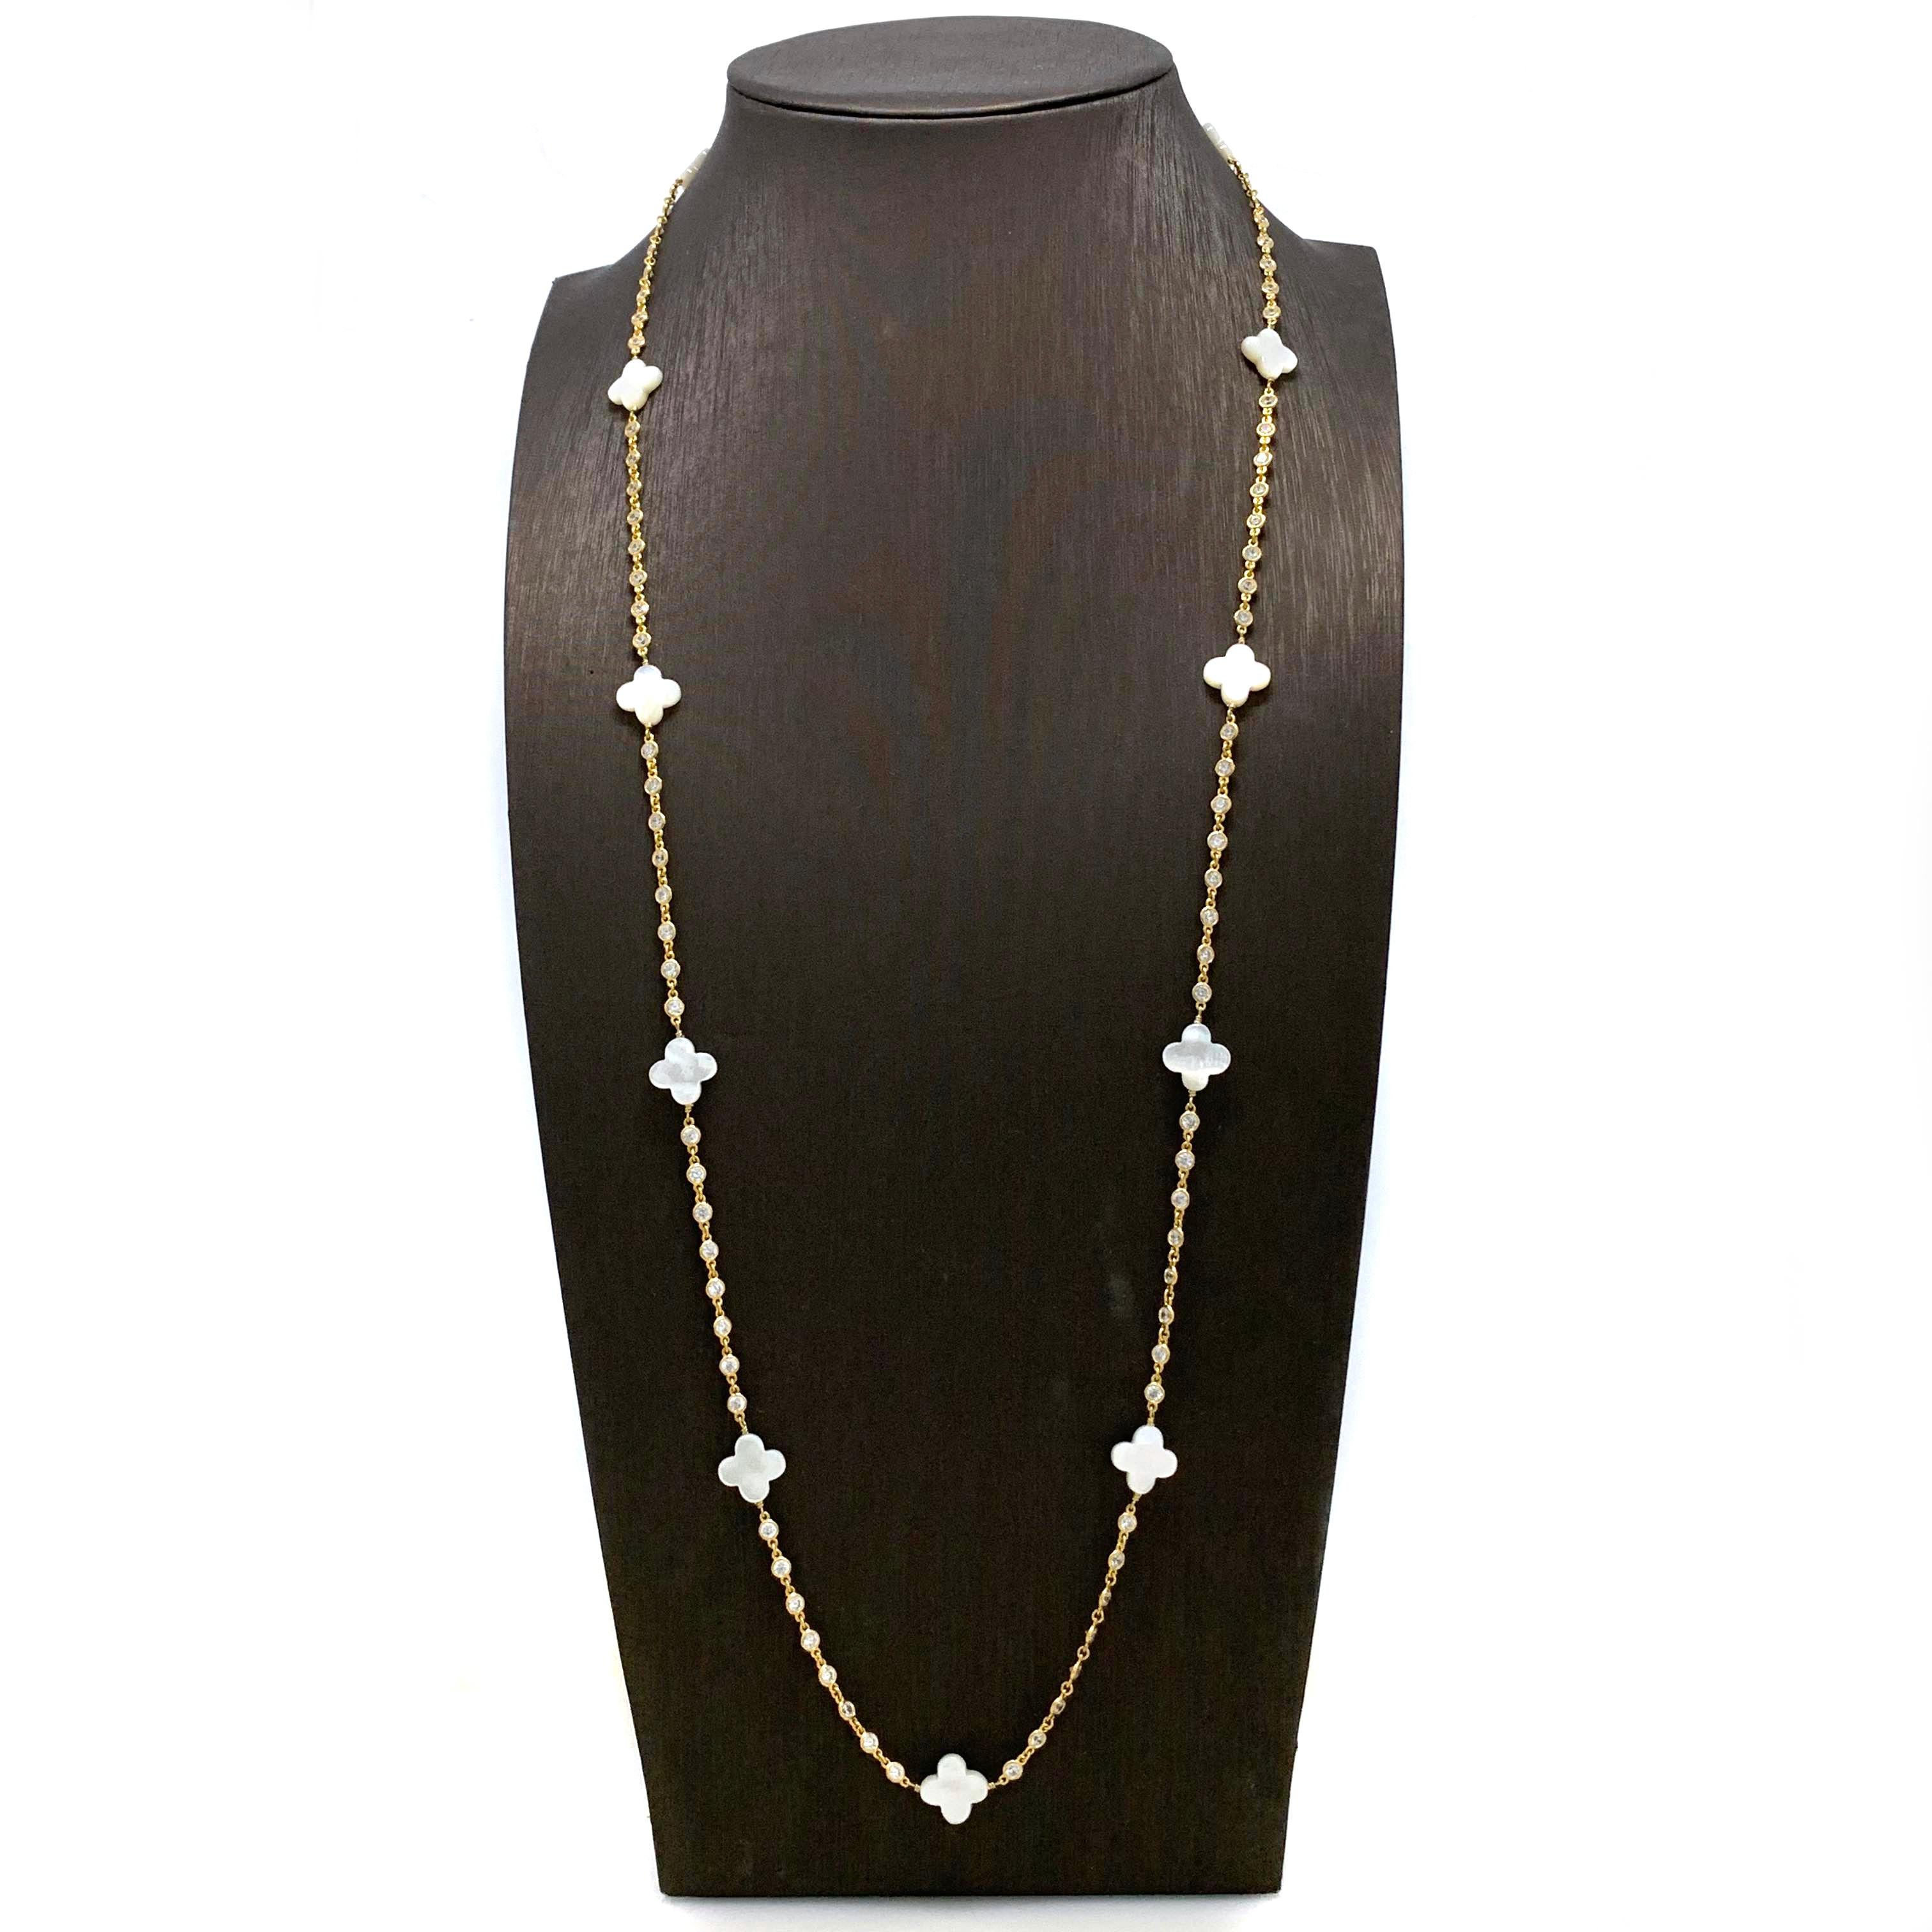 Mother of Pearl Clover Long Station Vermeil Necklace

The beautiful elegant necklace features 11 pieces of clover-shape mother of pearl and continuous of hand bezel-set faceted simulated diamond cz (0.10ct size each - 9.60ct size total), all